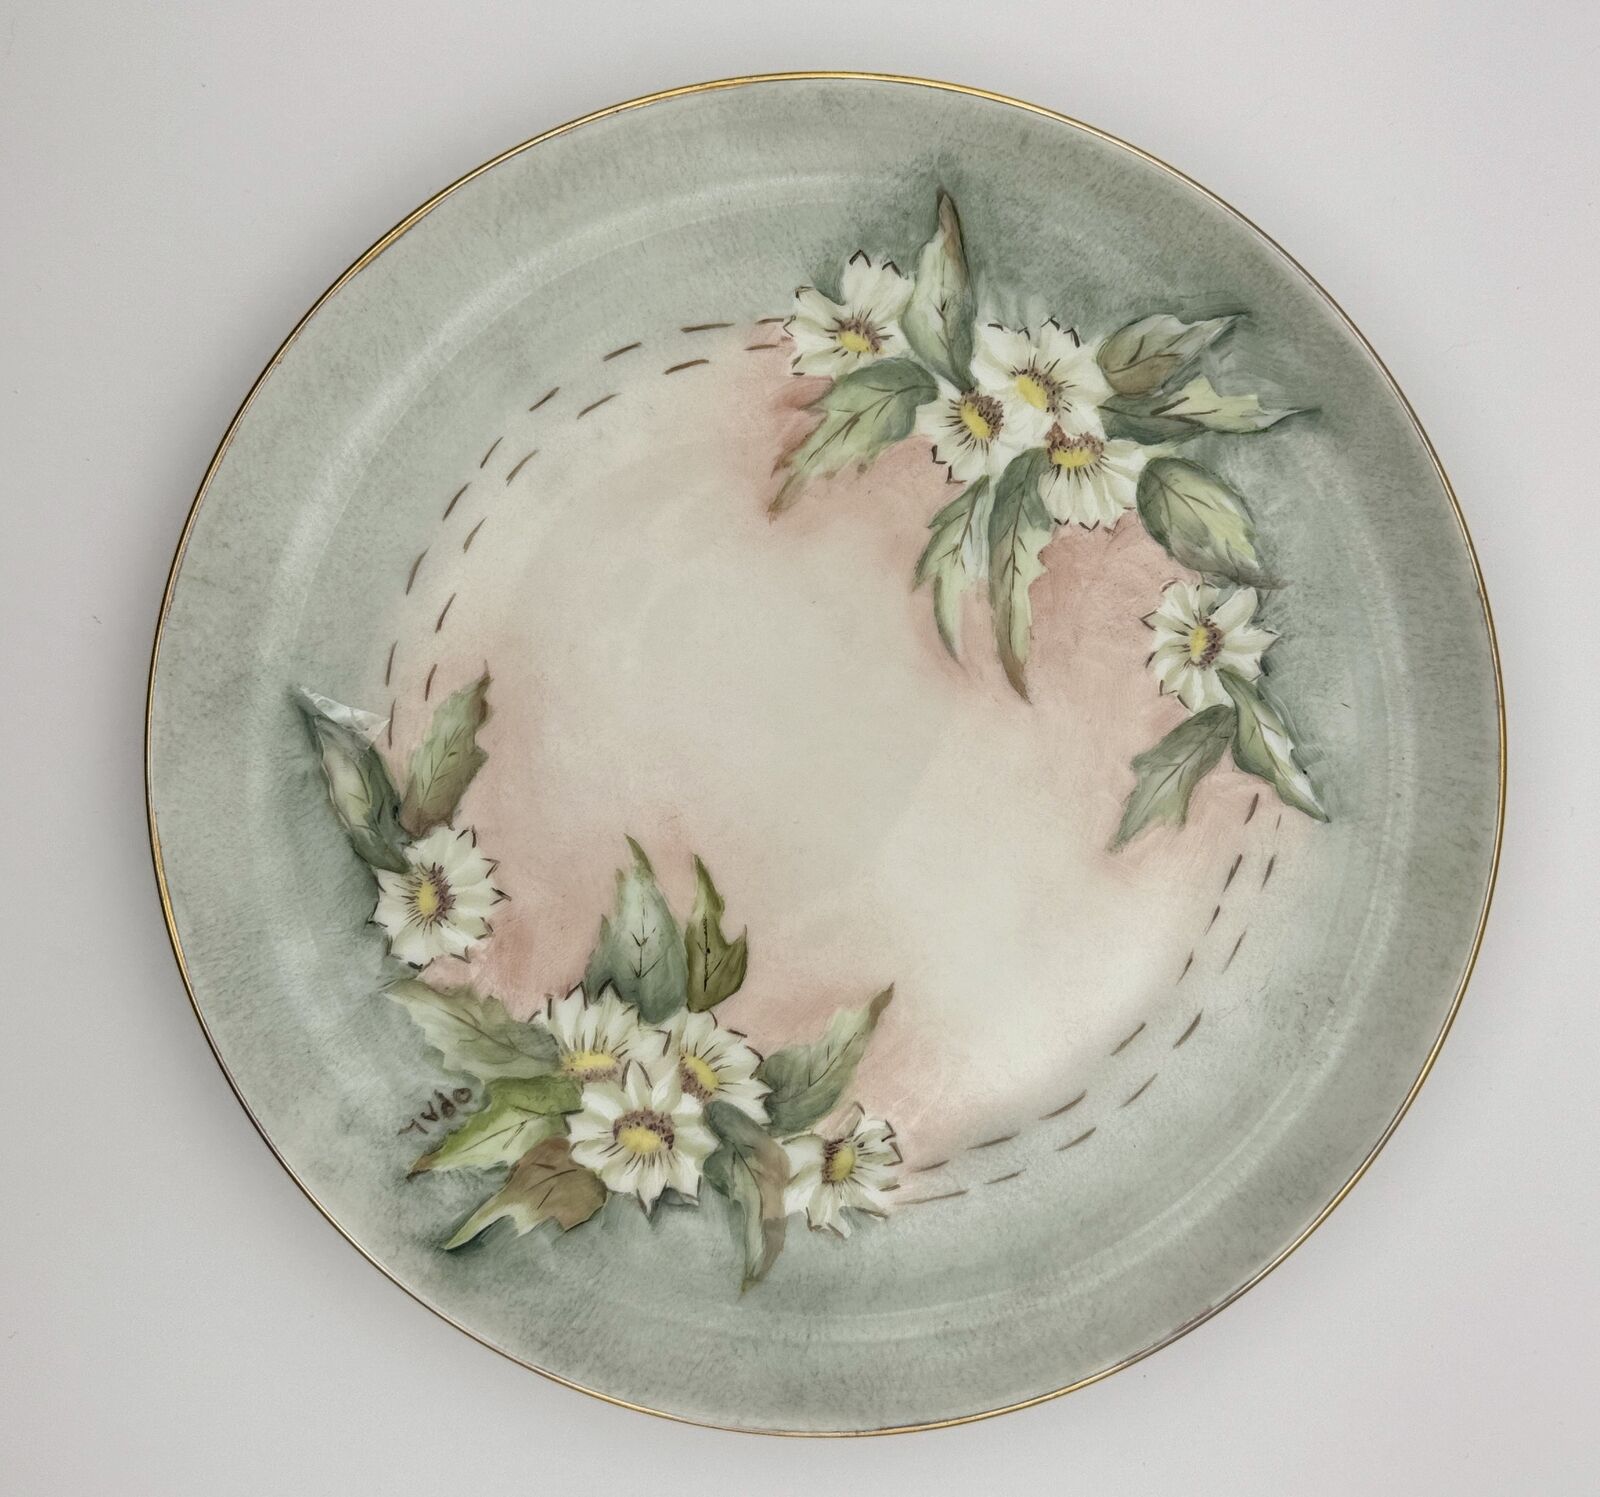 German Hand-Painted Porcelain Plate with Floral Design